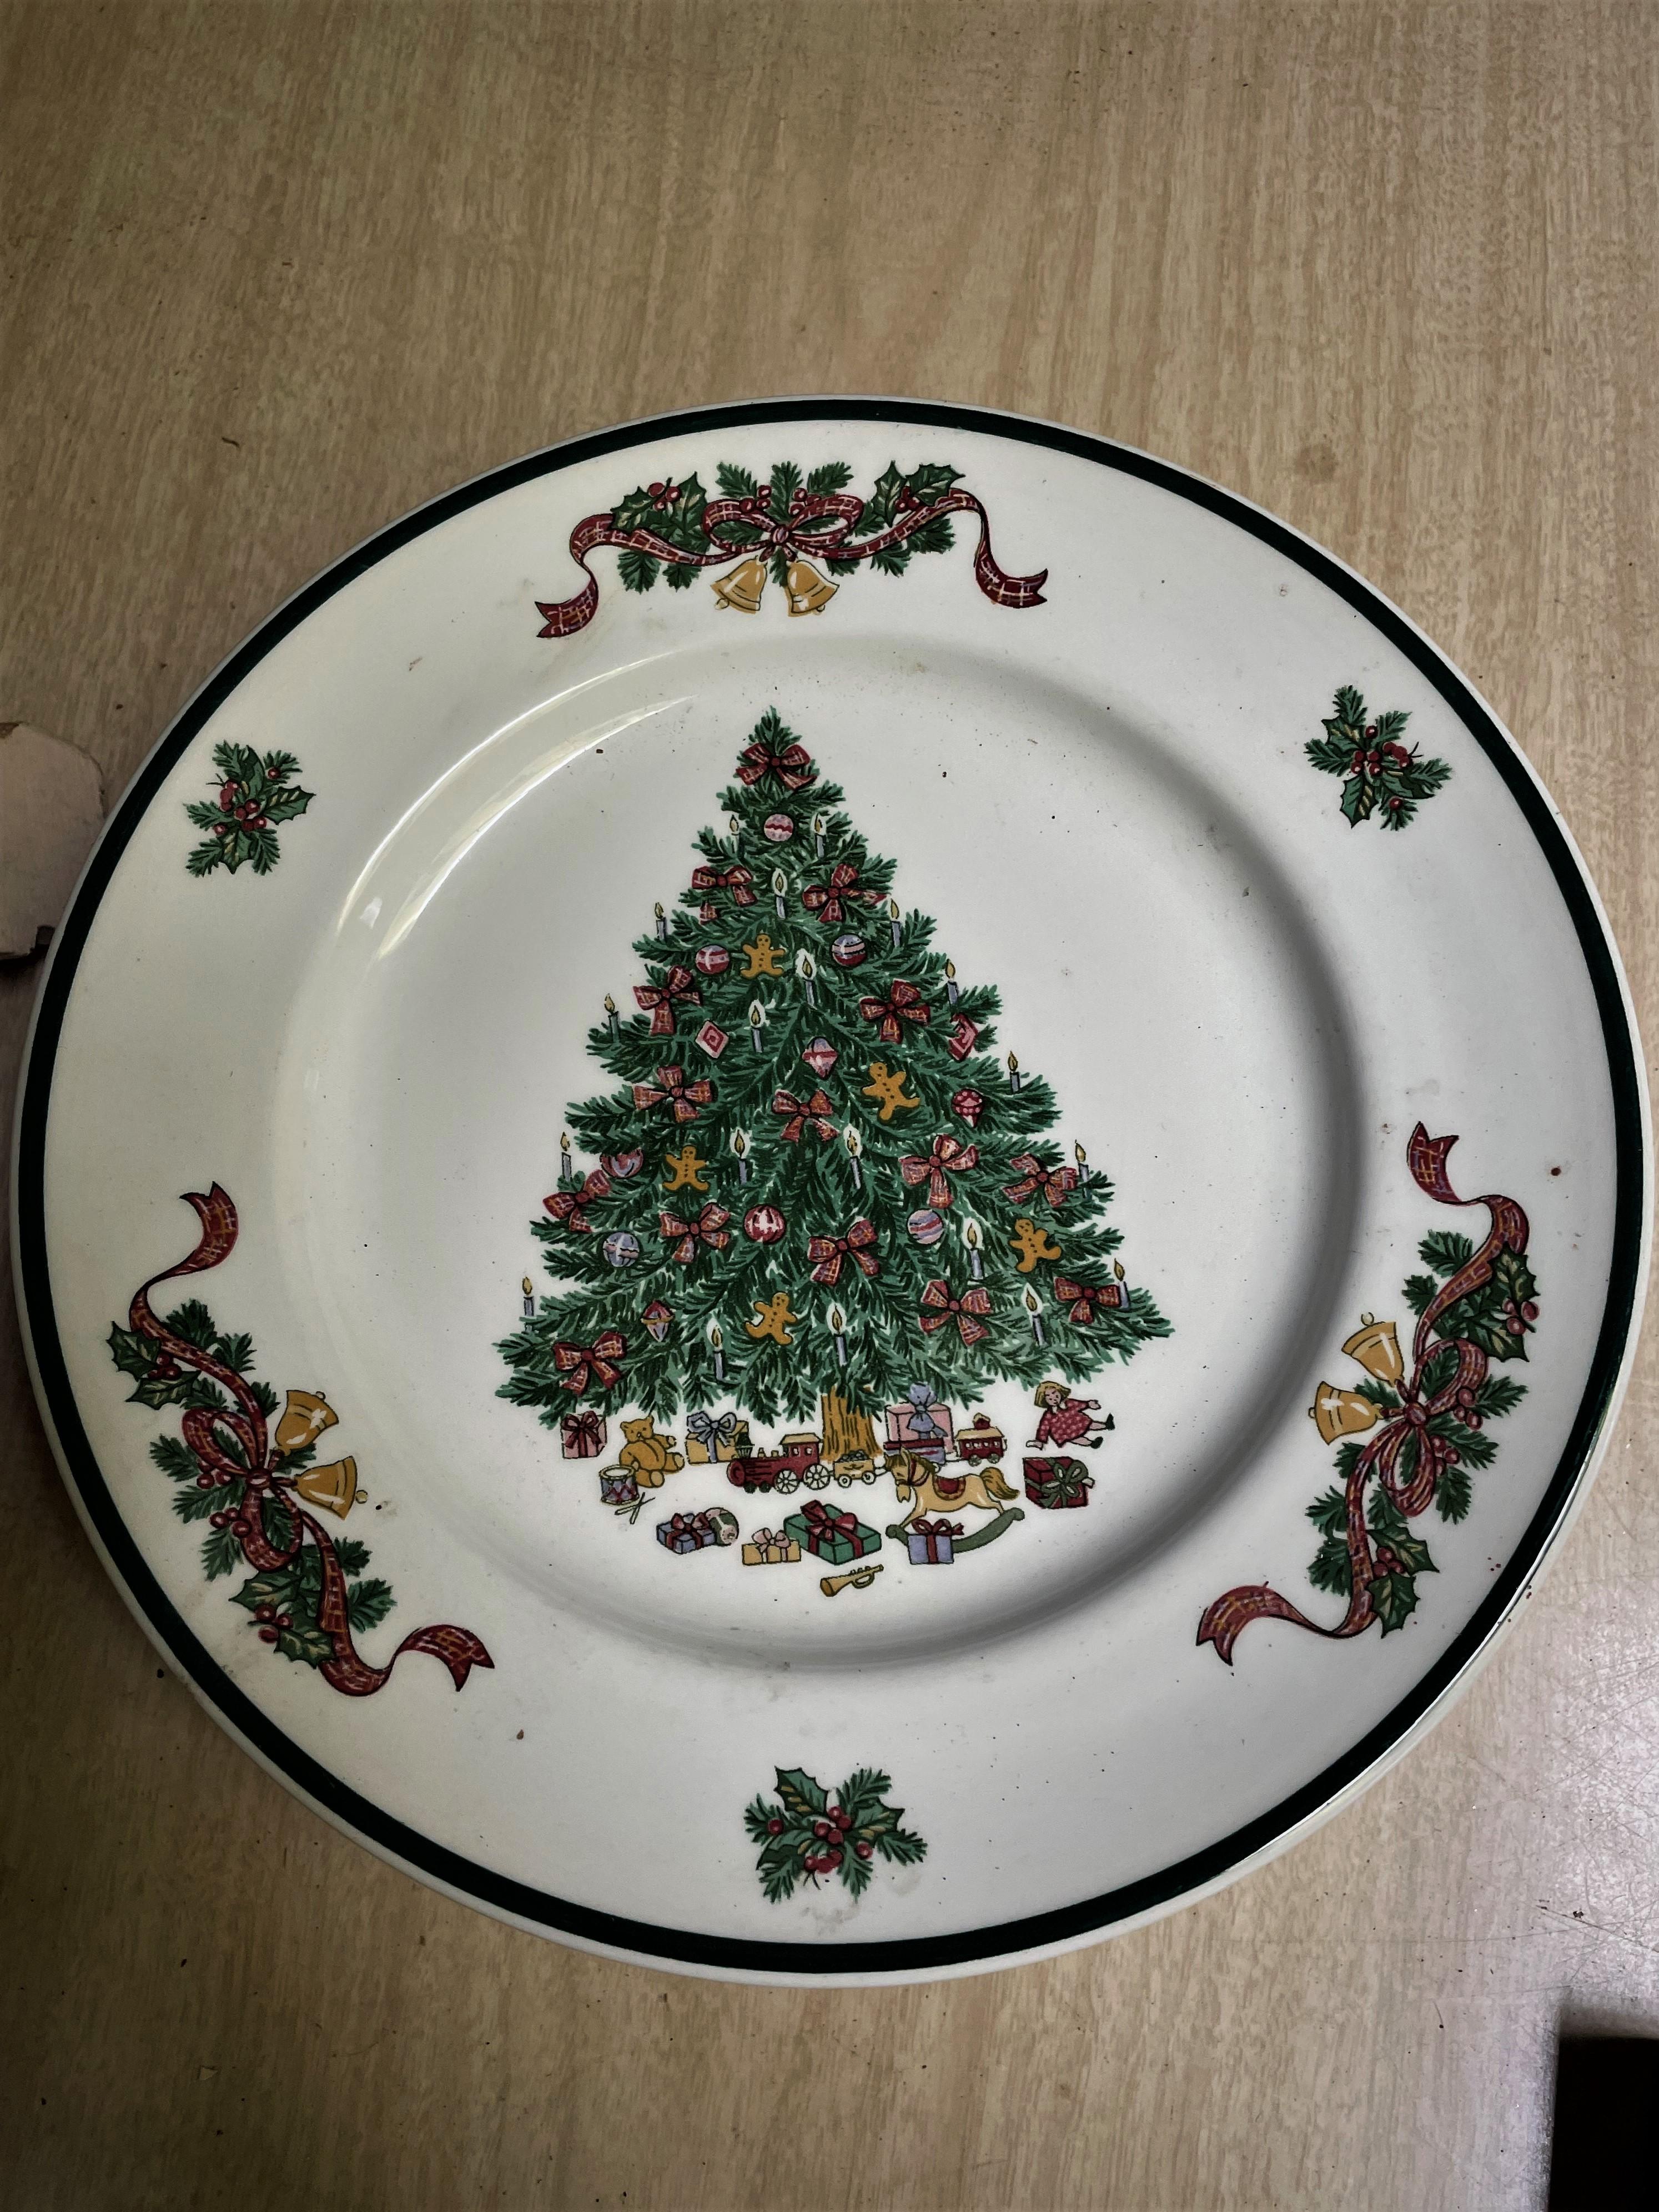 This is a wonderfully decorative set of 10 dinner plates with a grand Christmas tree laden with bows, Gingerbread men, candles and round ornaments and displaying lots of toys and wrapped packages underneath it. There are bells, holly and bows spaced